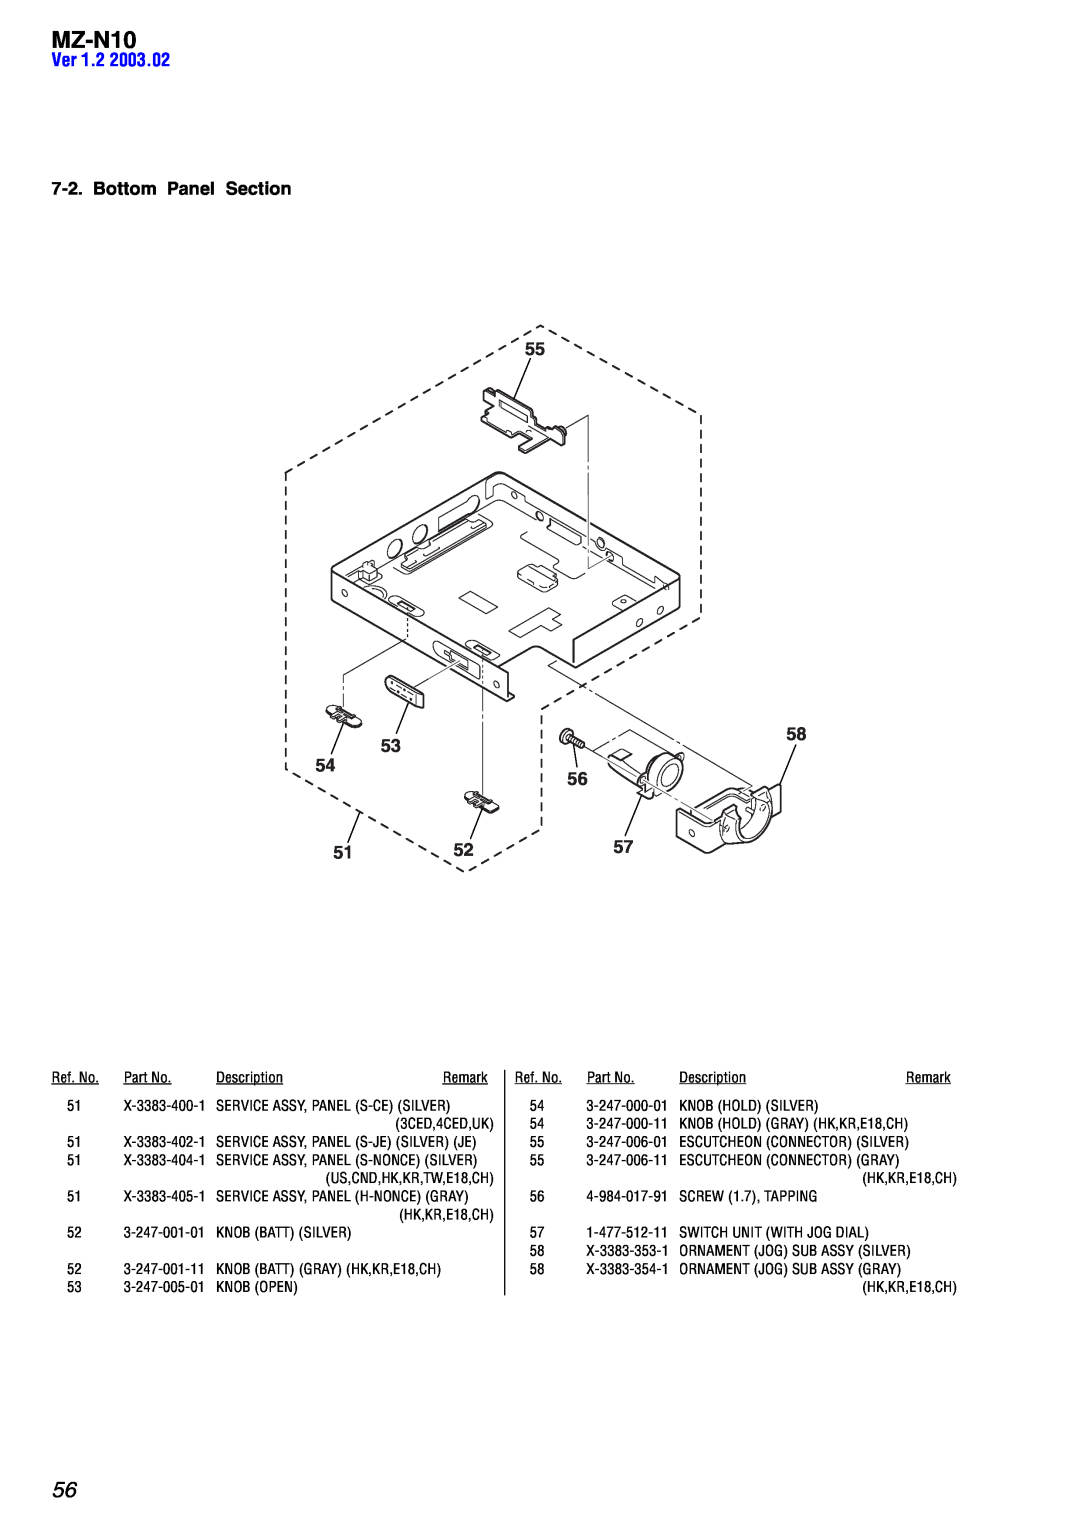 Sony MZ-N10 service manual Ver, Bottom Panel Section 